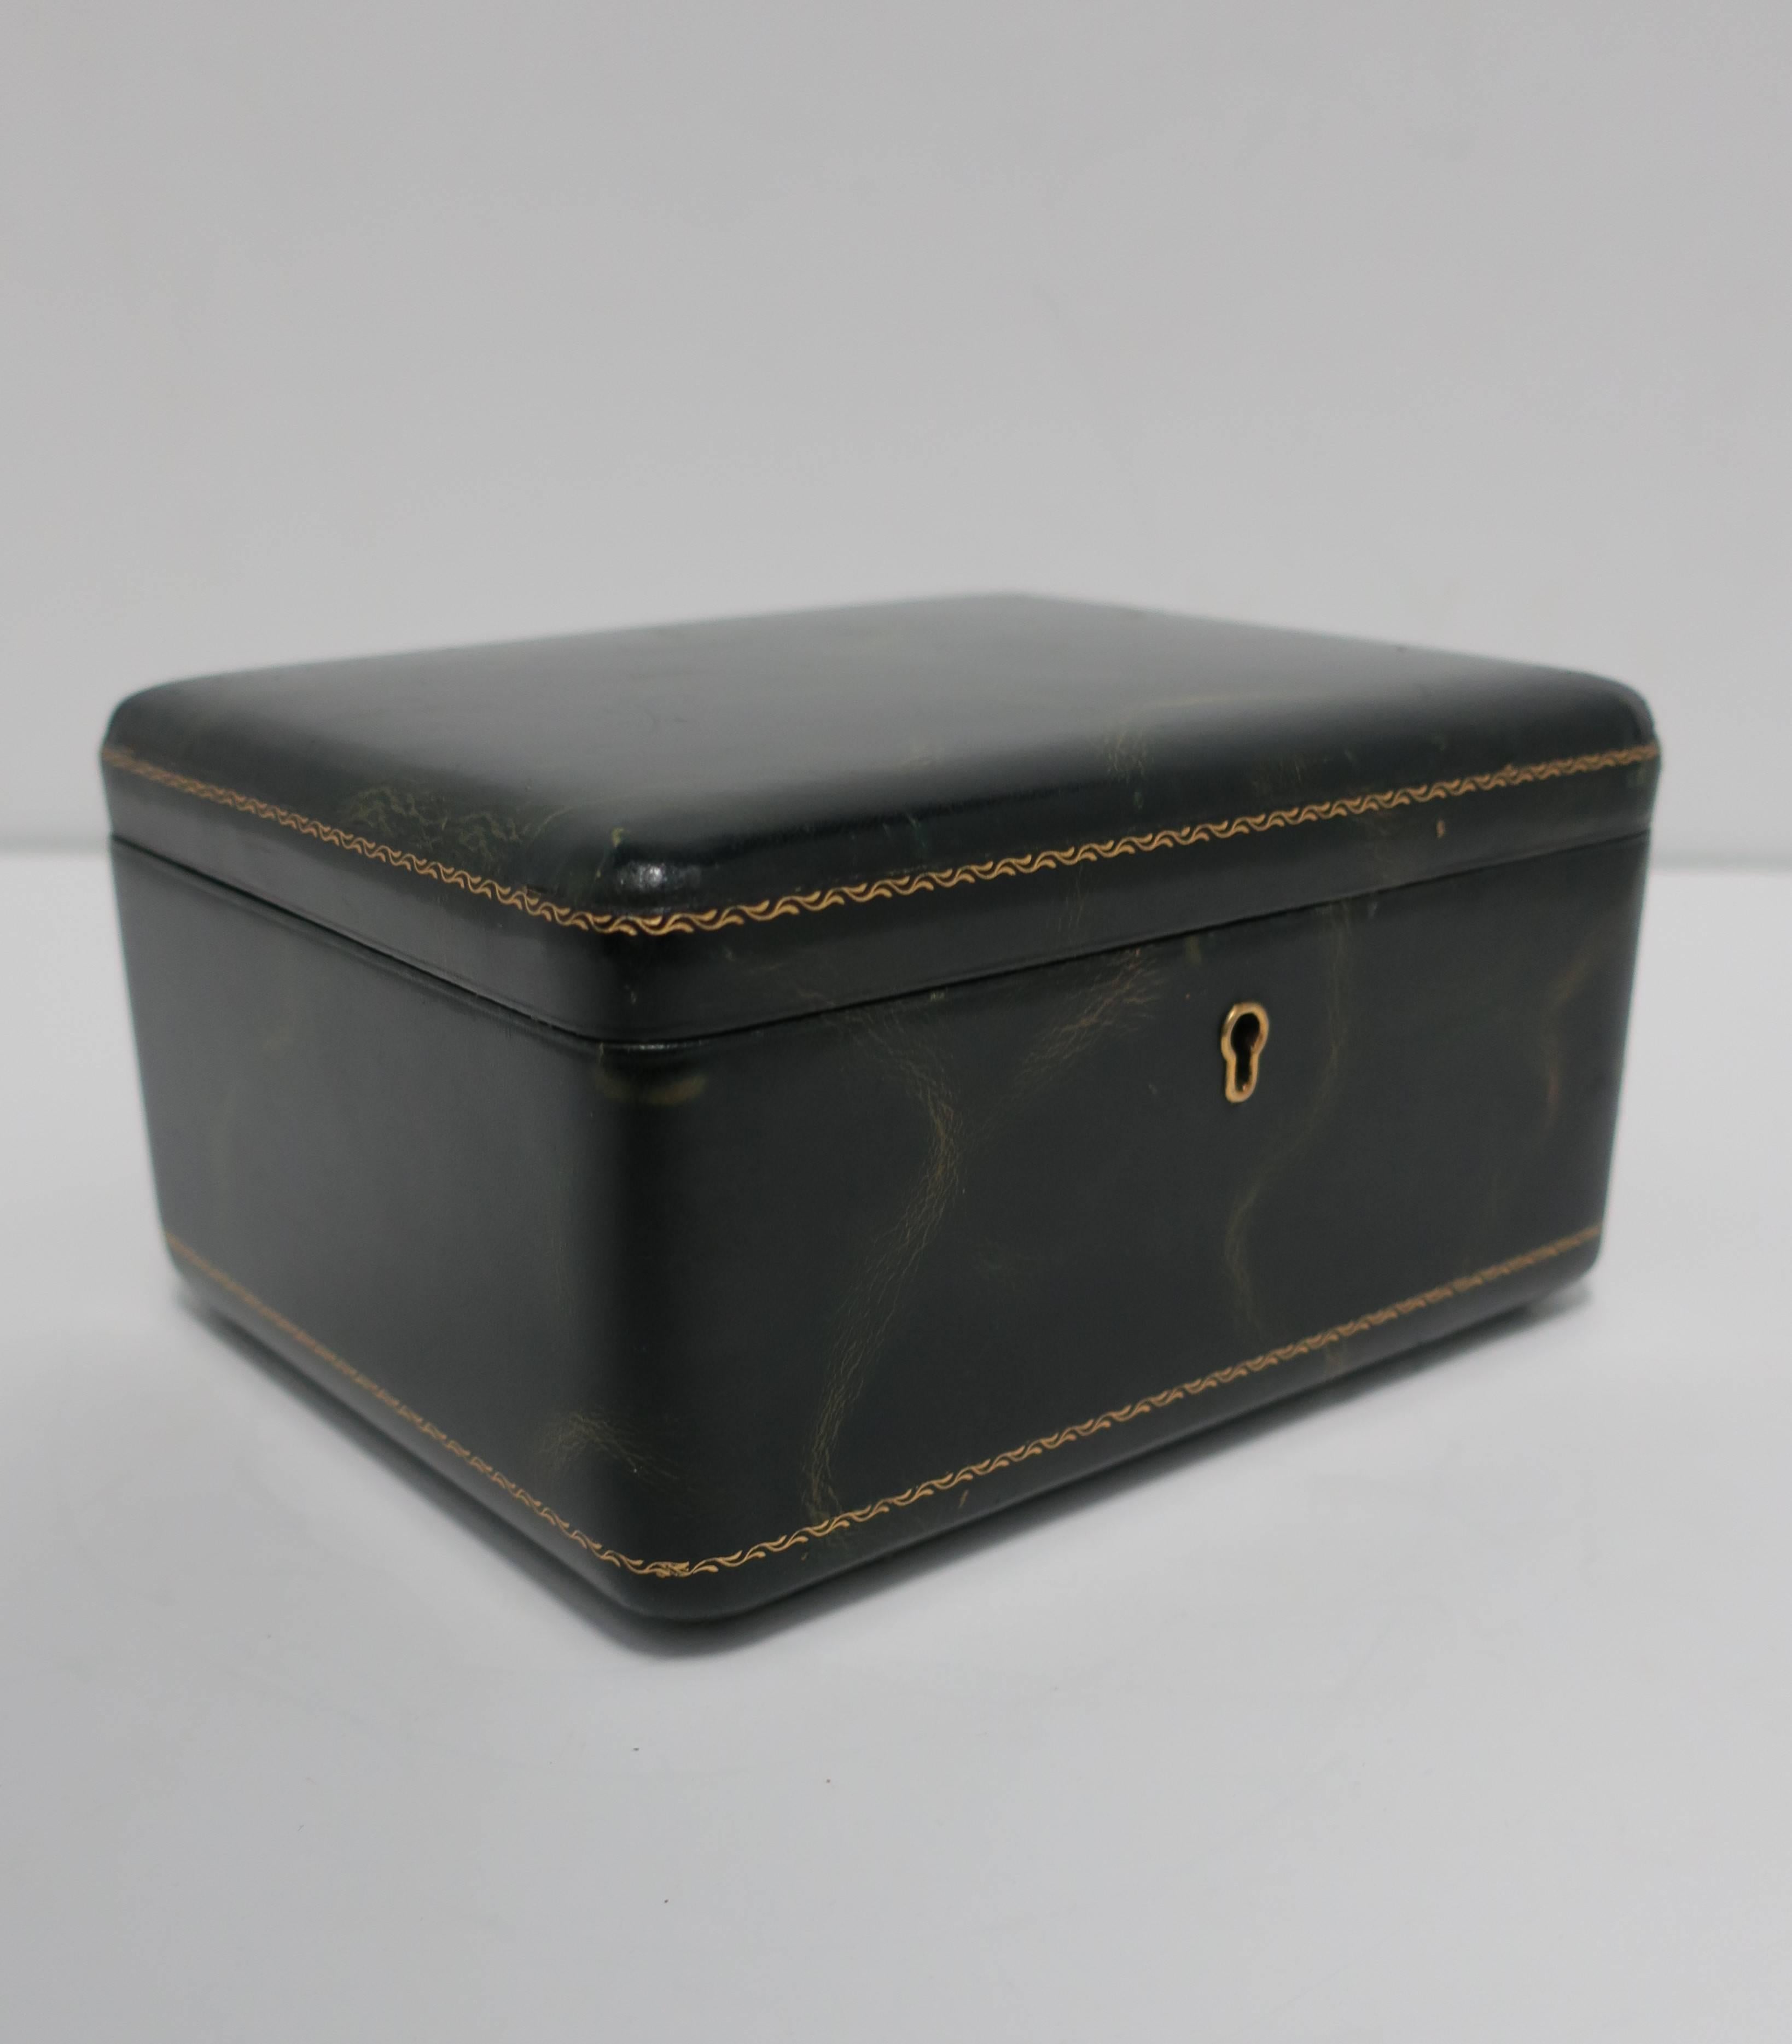 Spanish Leather Jewelry Box from Spain